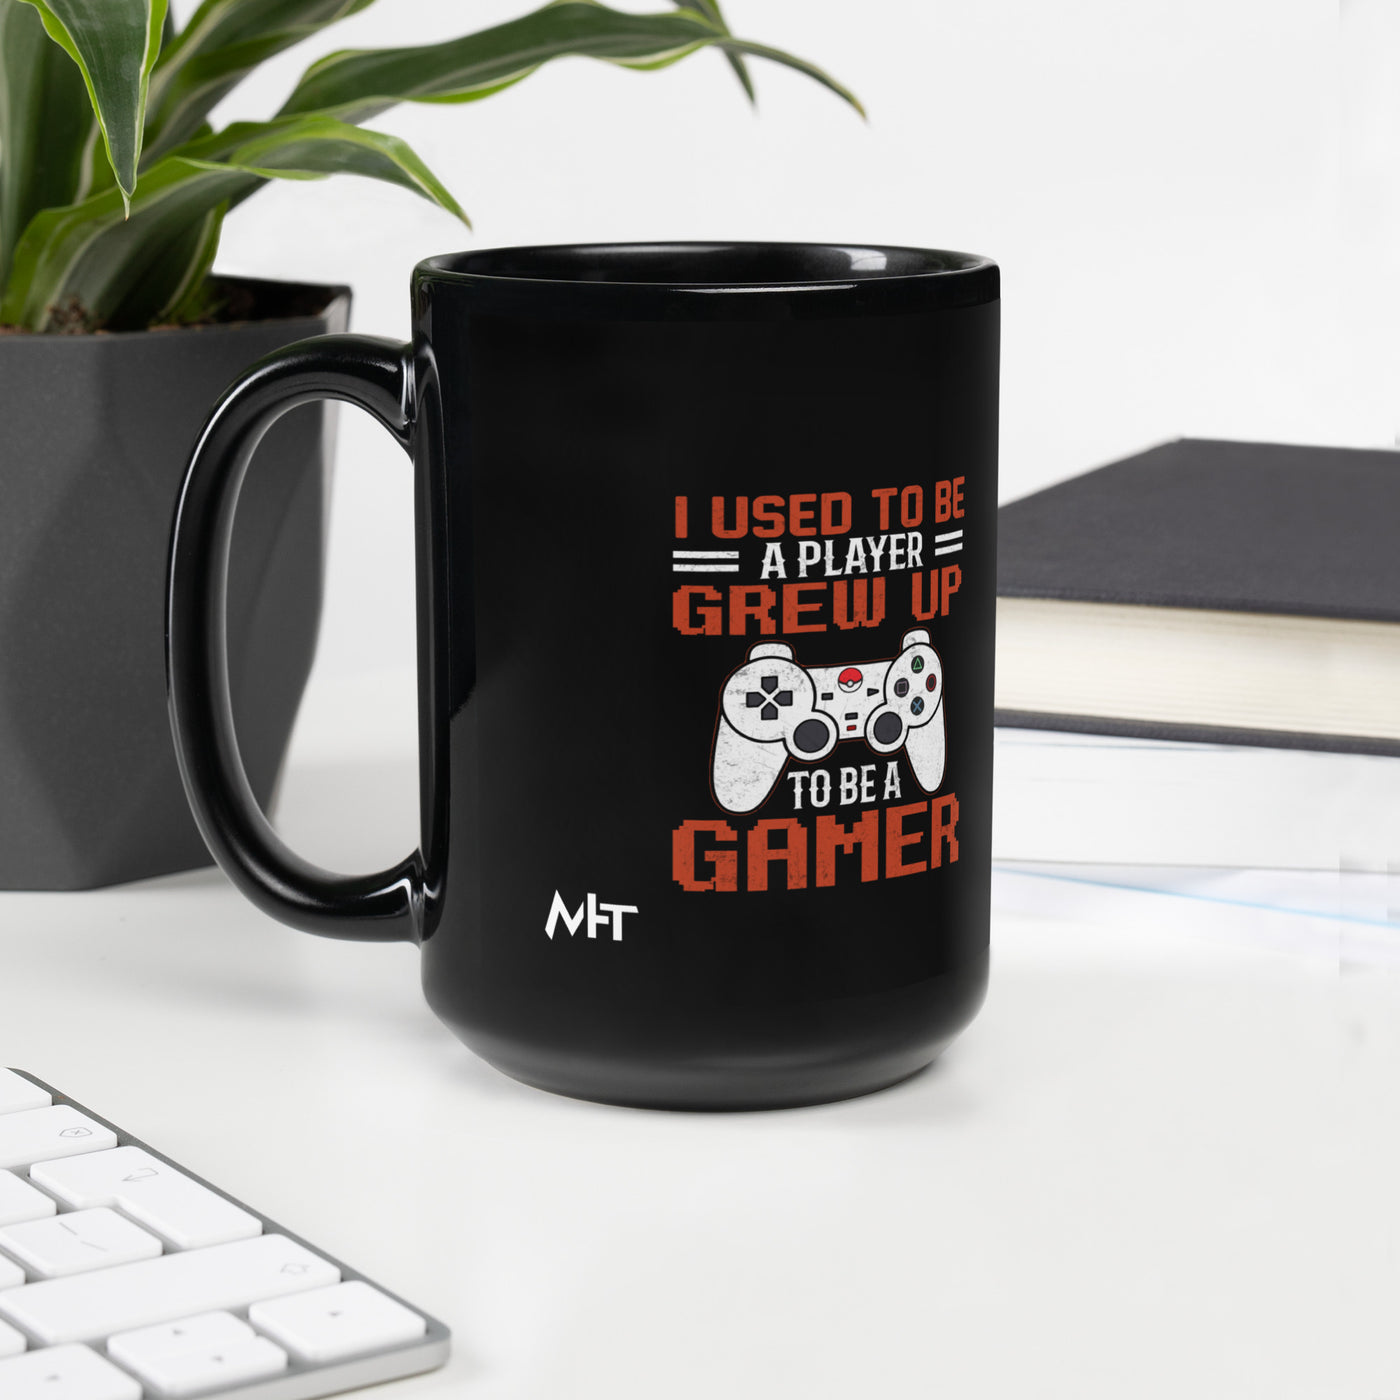 I Used to be a Player; Grew up to be a Gamer - Black Glossy Mug